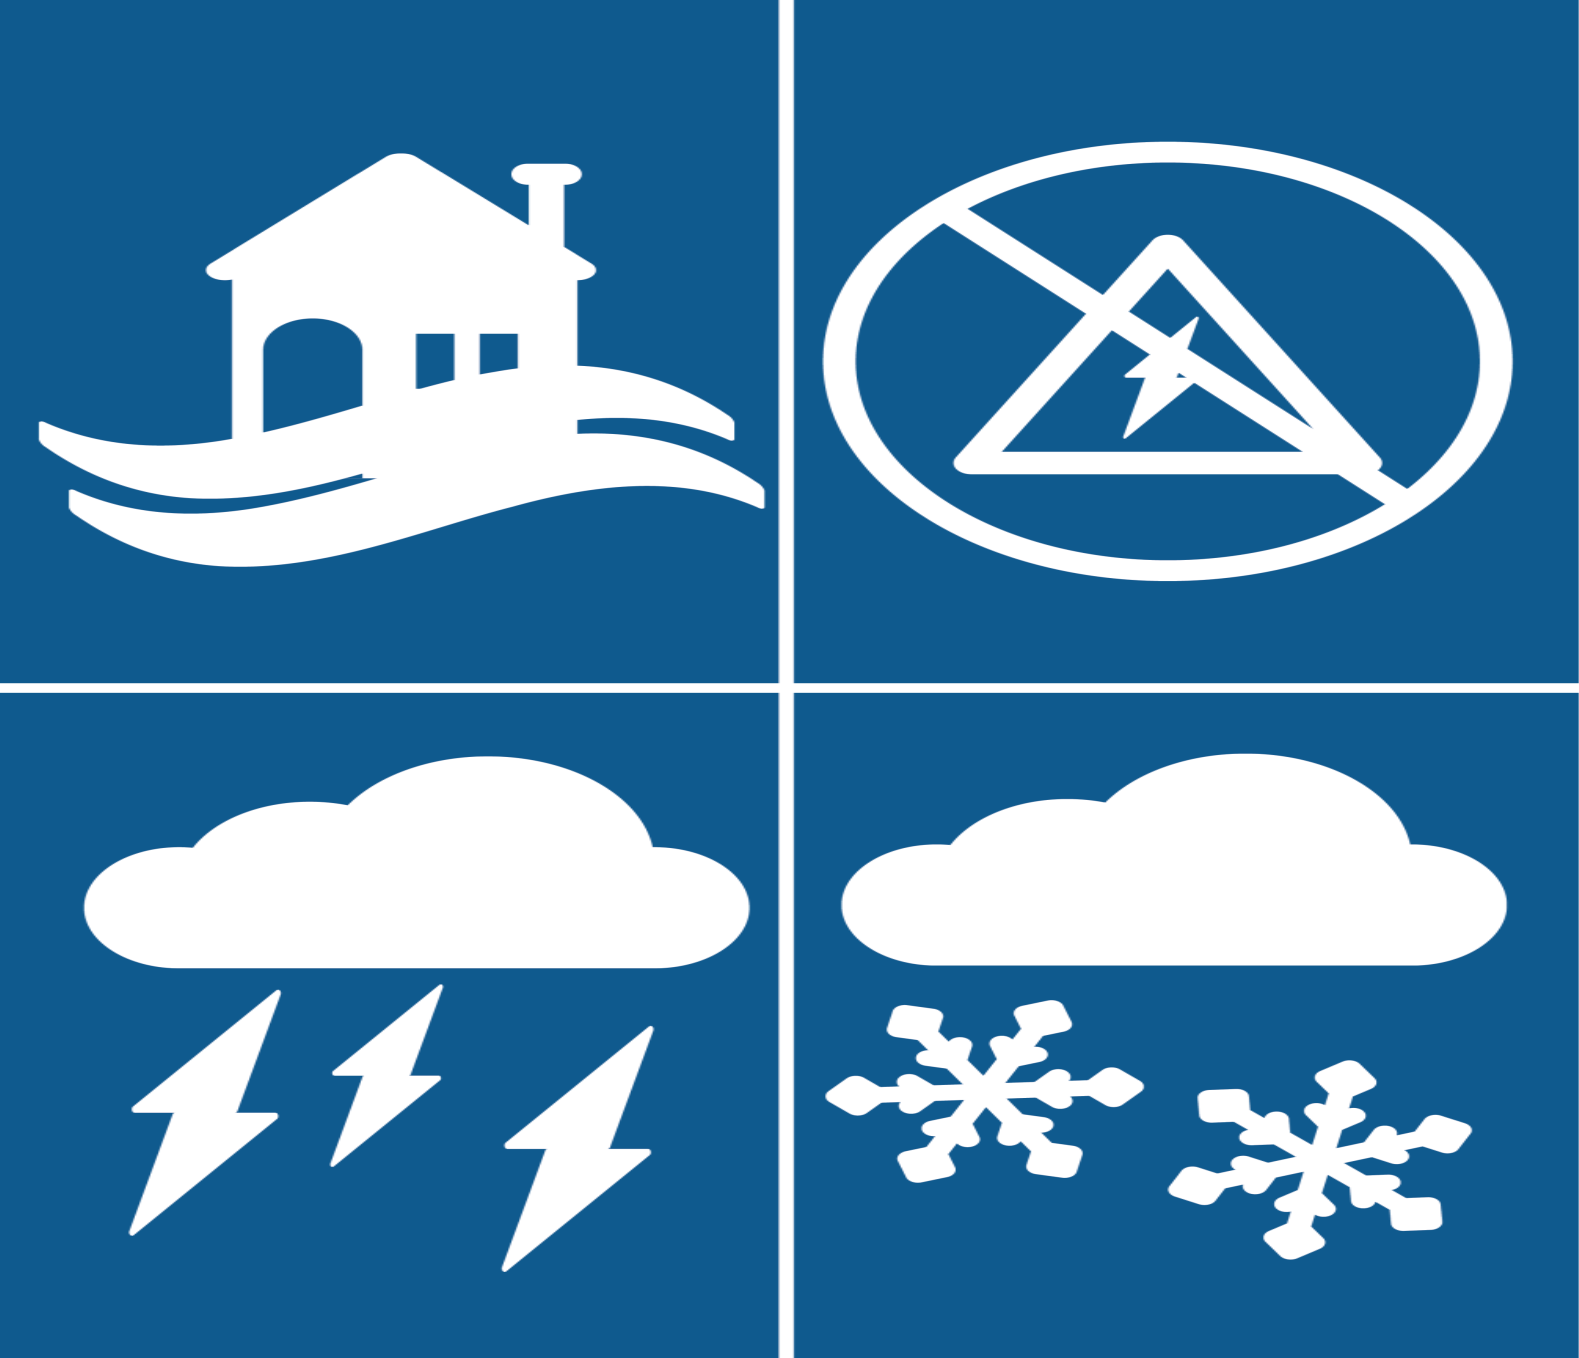 A flooded house, lightning bolt crossed out, cloud with lightning bolts, cloud with snowflakes 